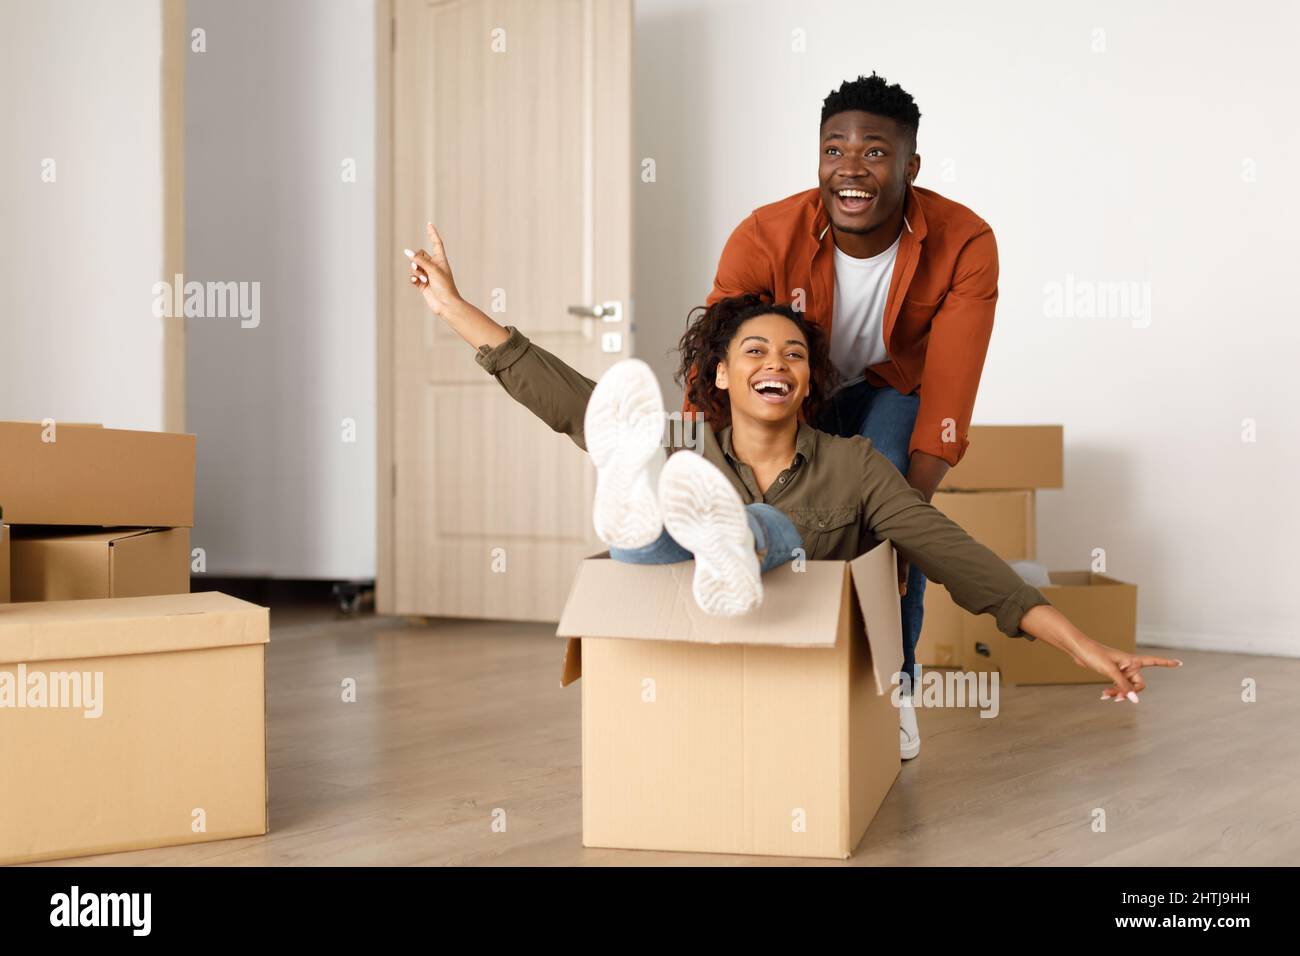 Happy African Man Riding Woman in Moving Box in Home Foto Stock